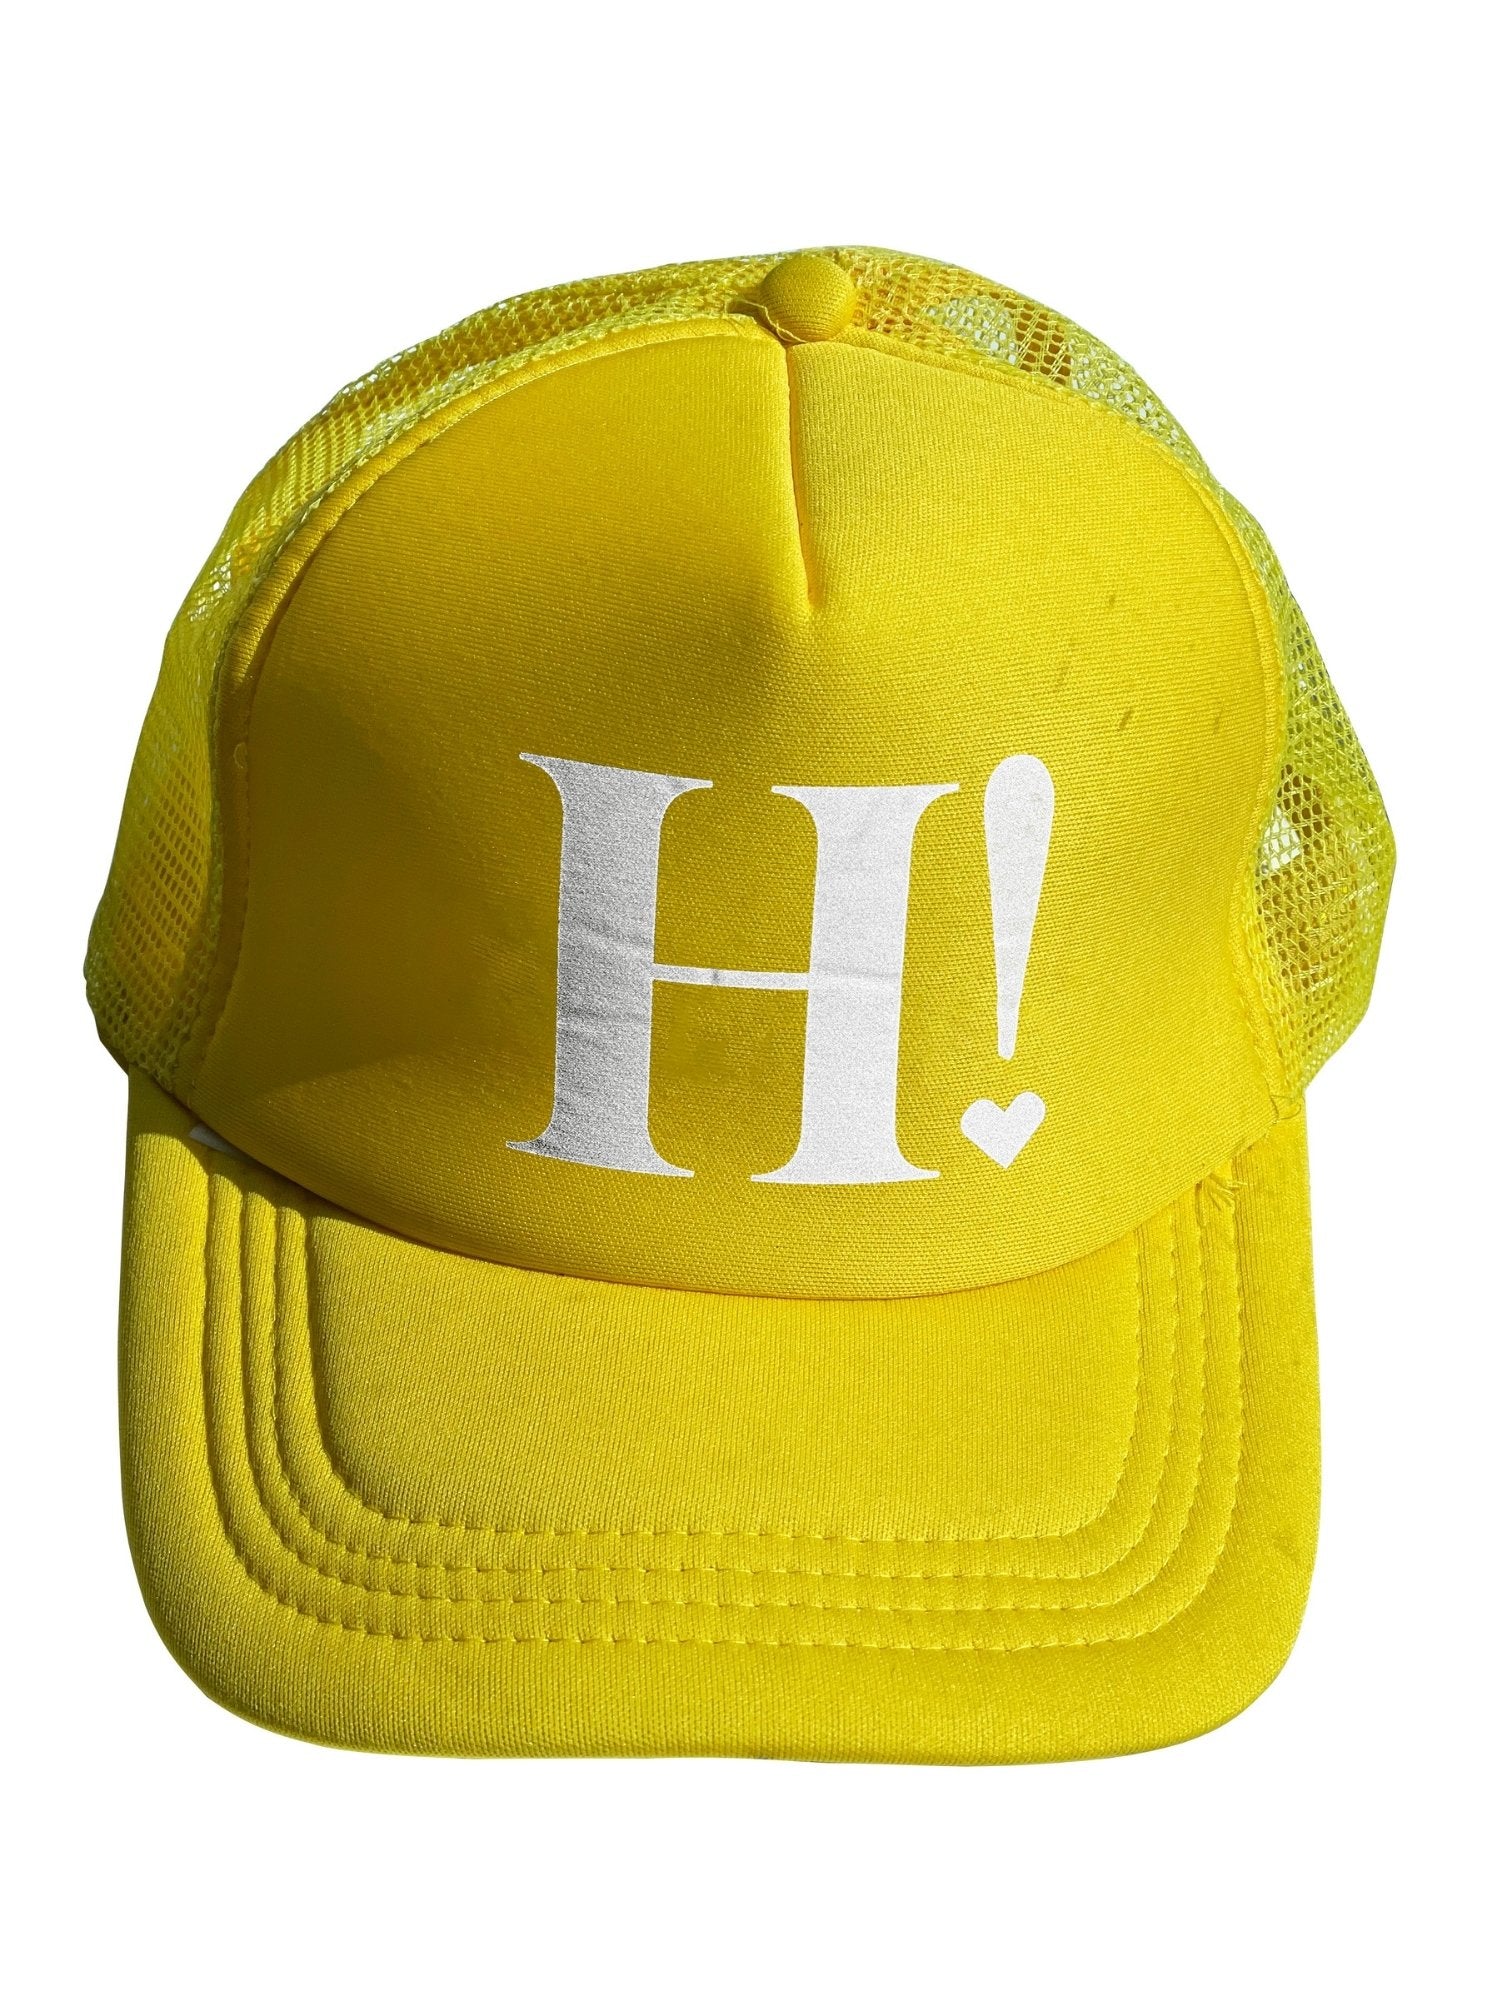 Travel Hat - Daffodil Yellow with White "H!"